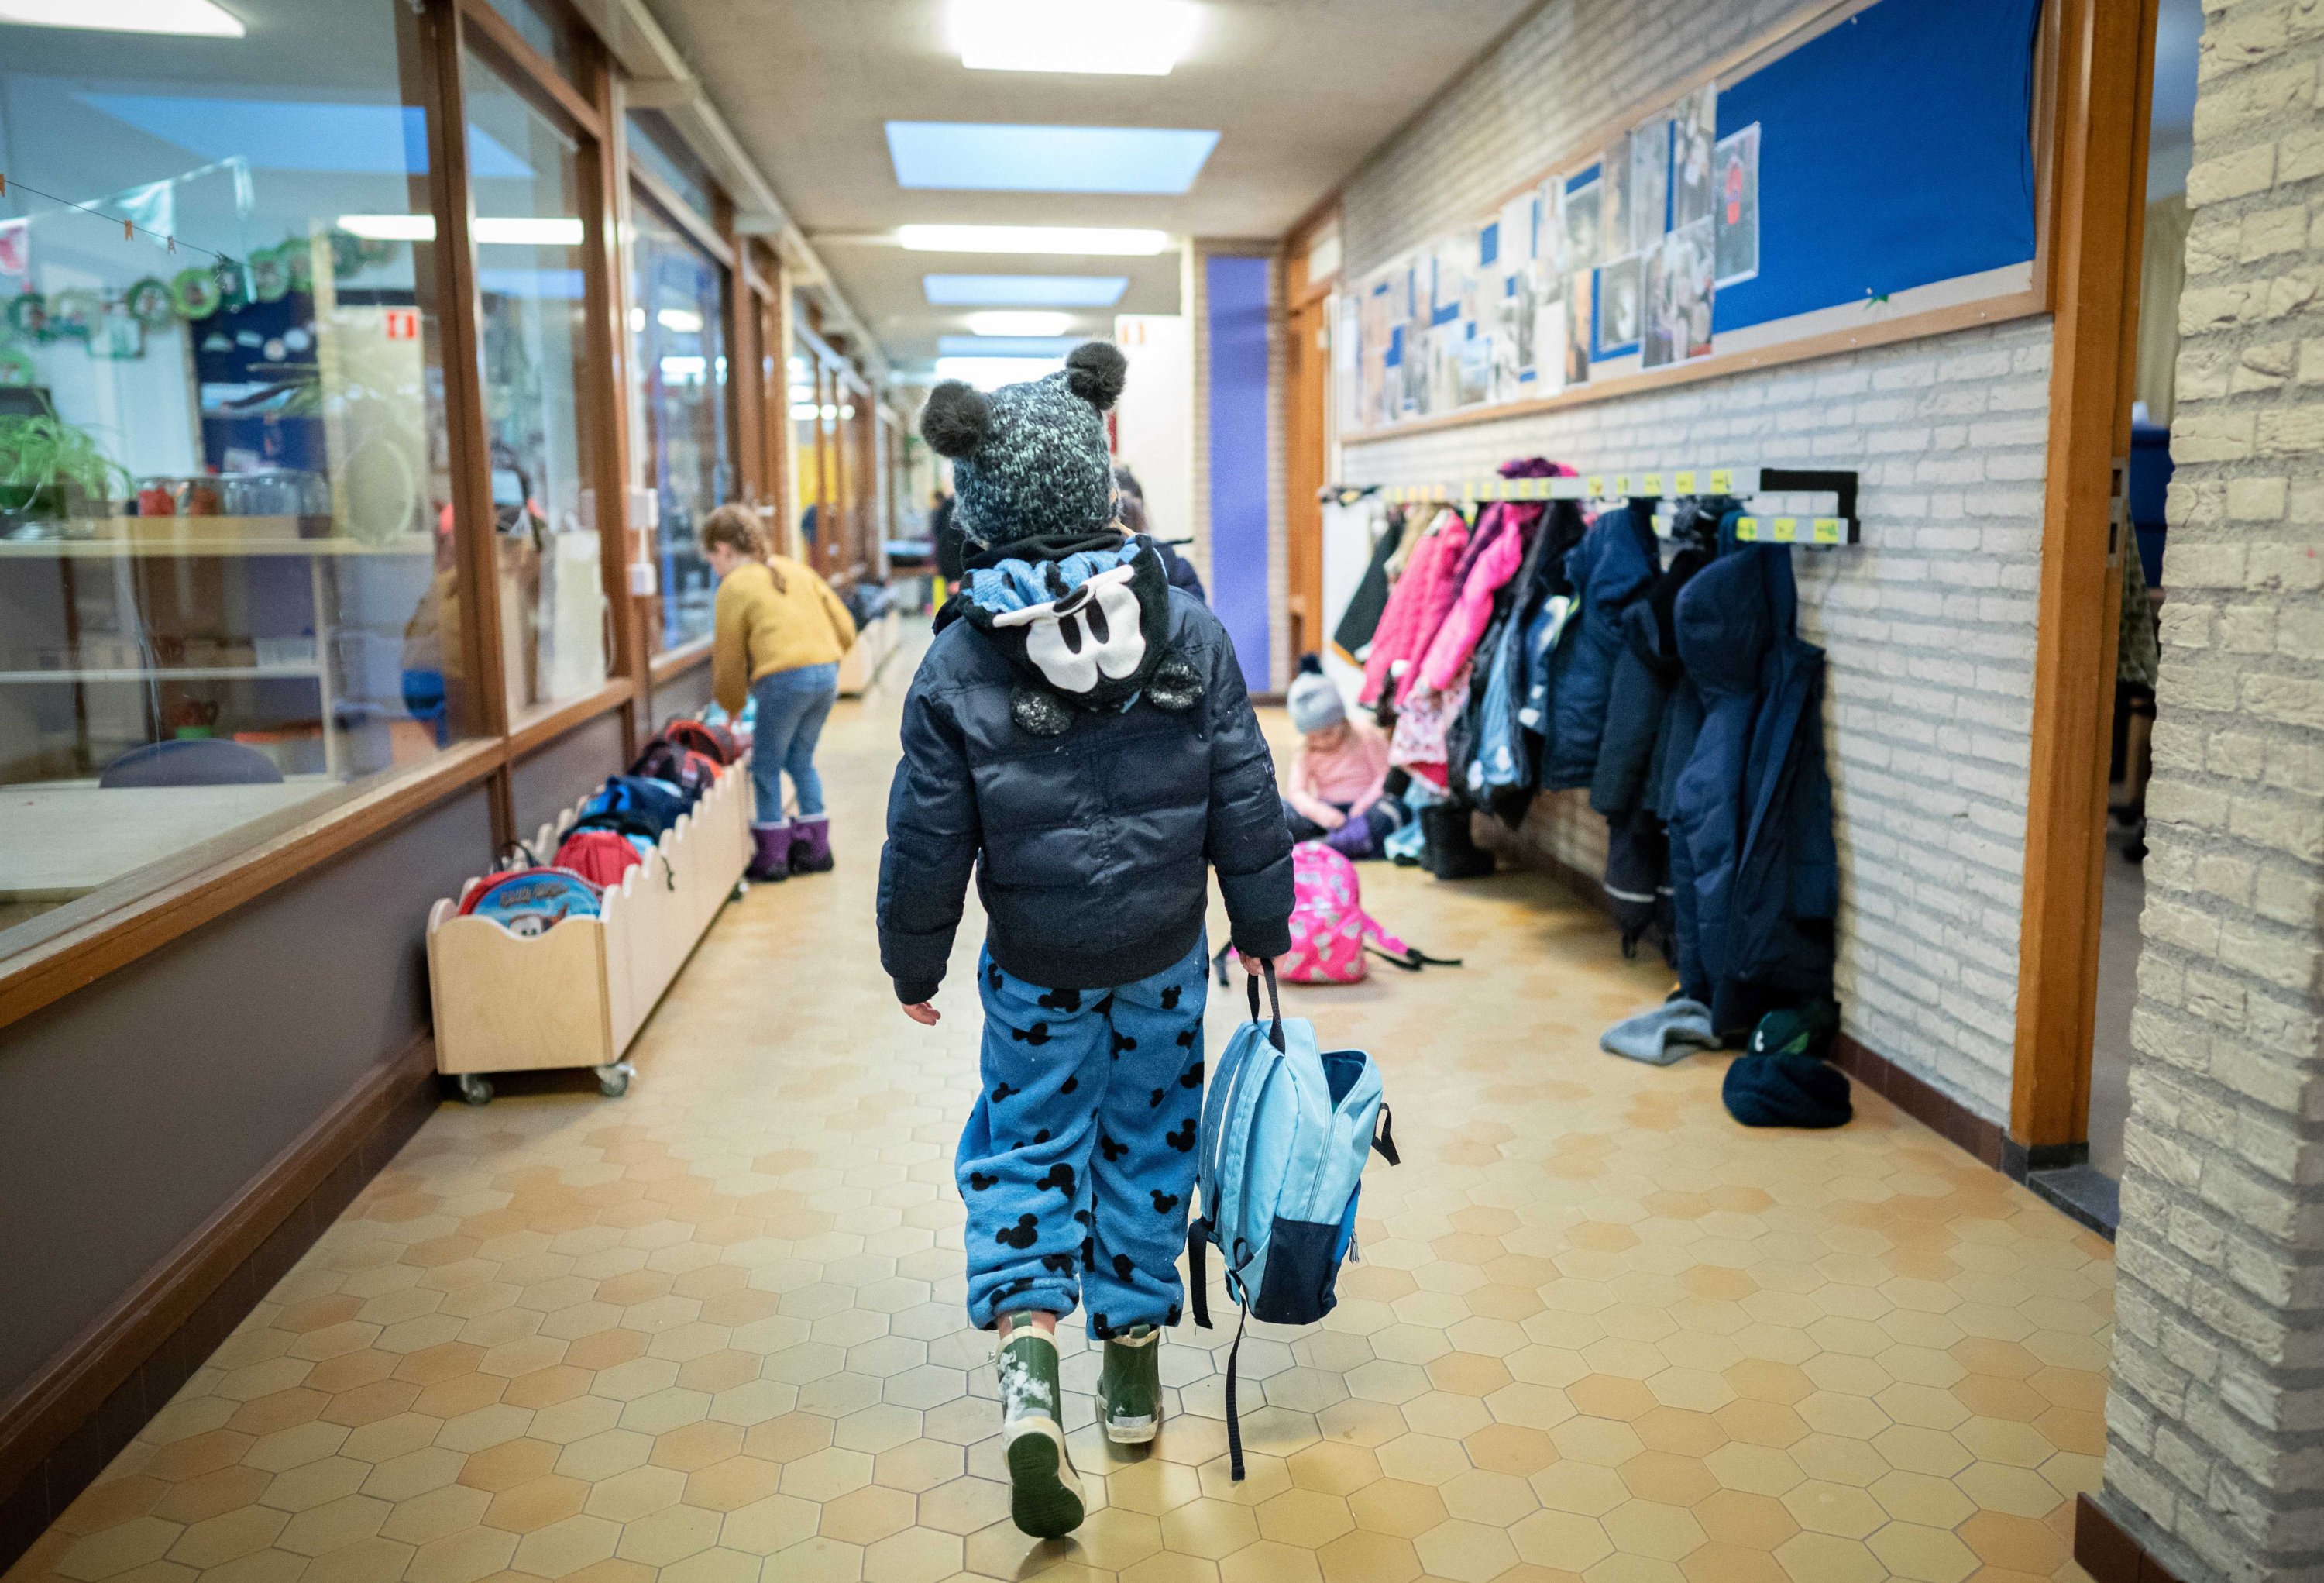 A pupil arrives at a primary school in the Hague, the Netherlands, Feb. 8, 2021. (EPA Photo)